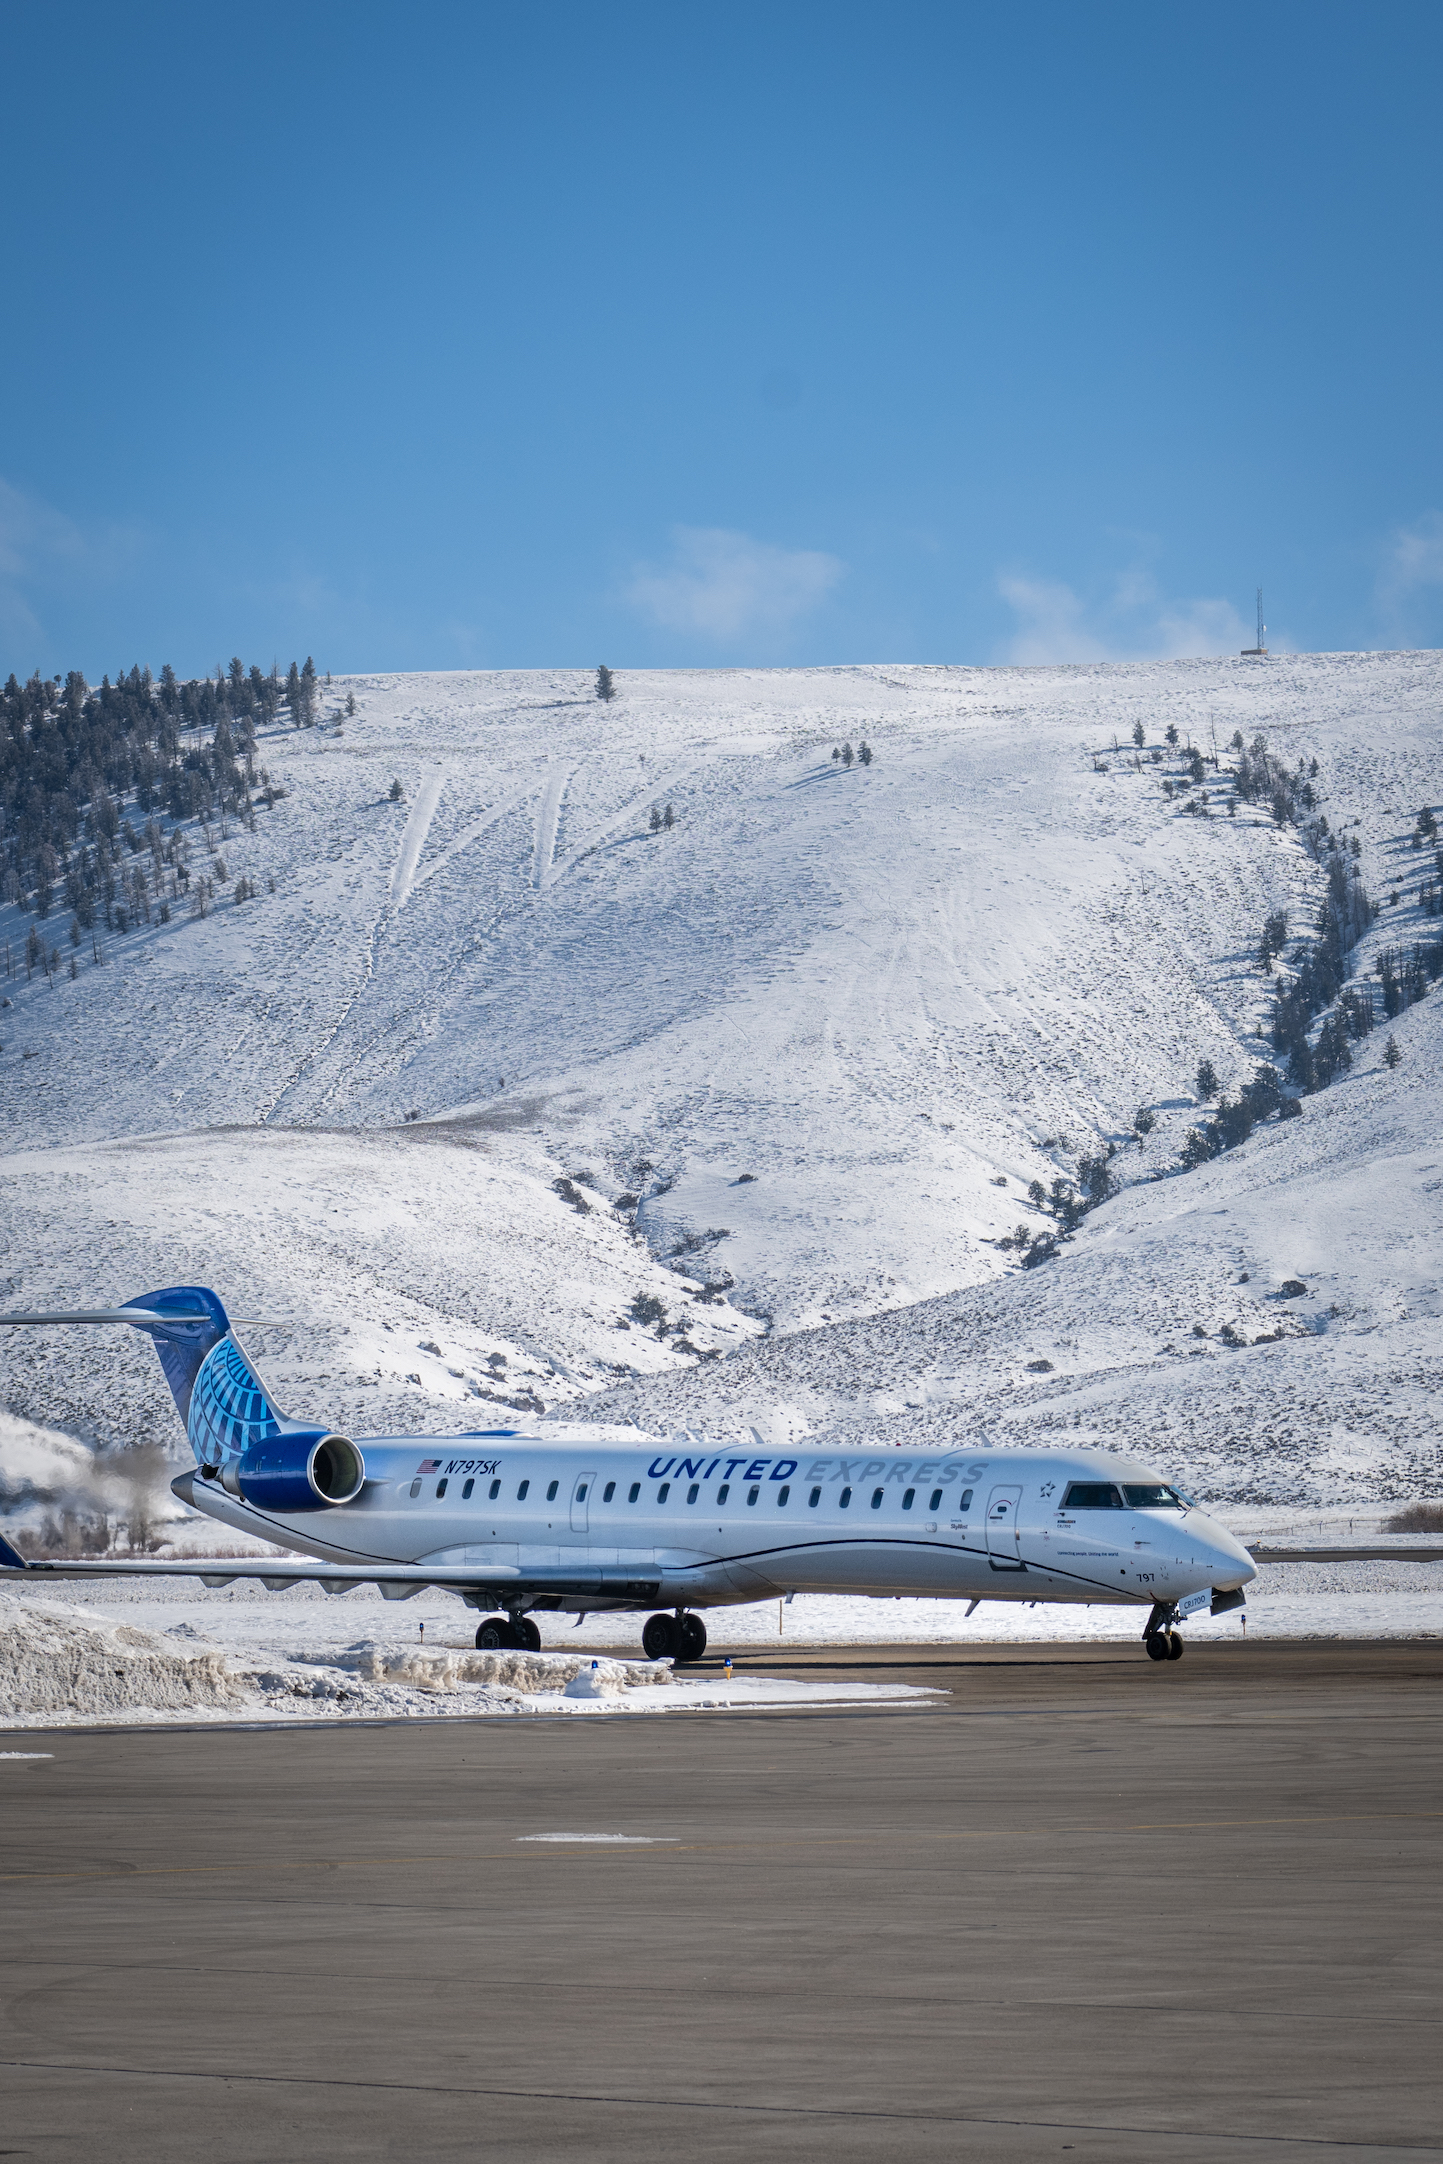 A plane landing on a runway with snowy mountain peaks in the background. Fly to Gunnison Crested Butte Regional Airport and get to Crested Butte and Gunnison easily